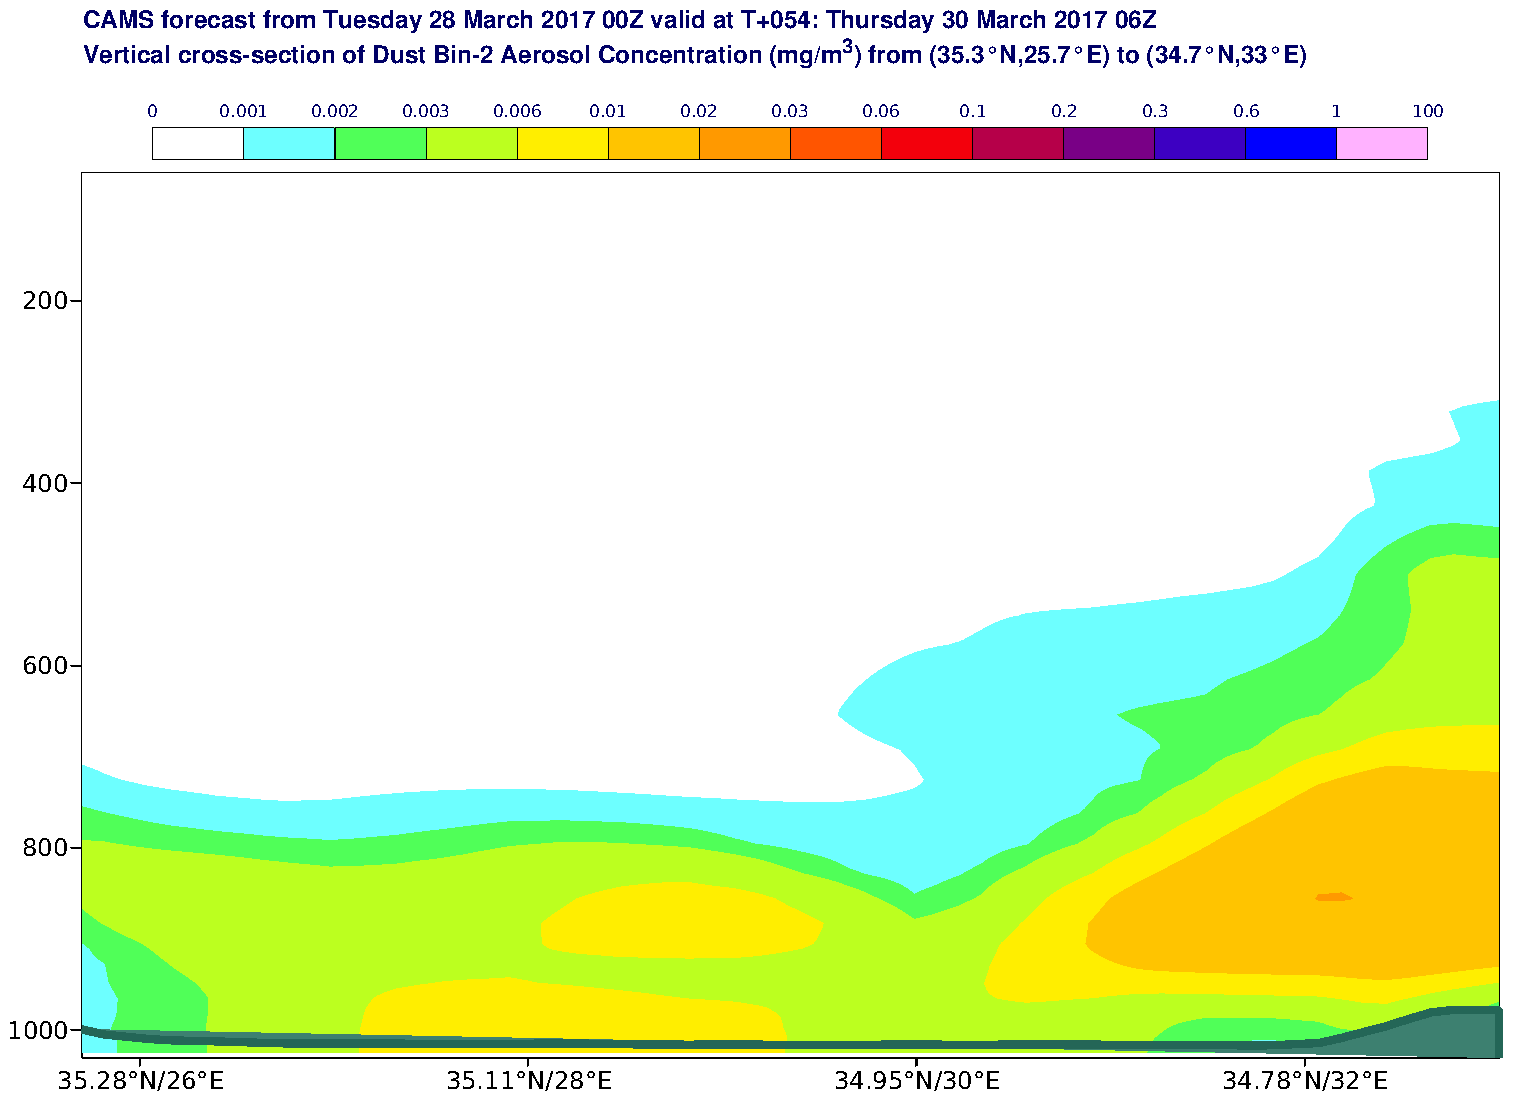 Vertical cross-section of Dust Bin-2 Aerosol Concentration (mg/m3) valid at T54 - 2017-03-30 06:00